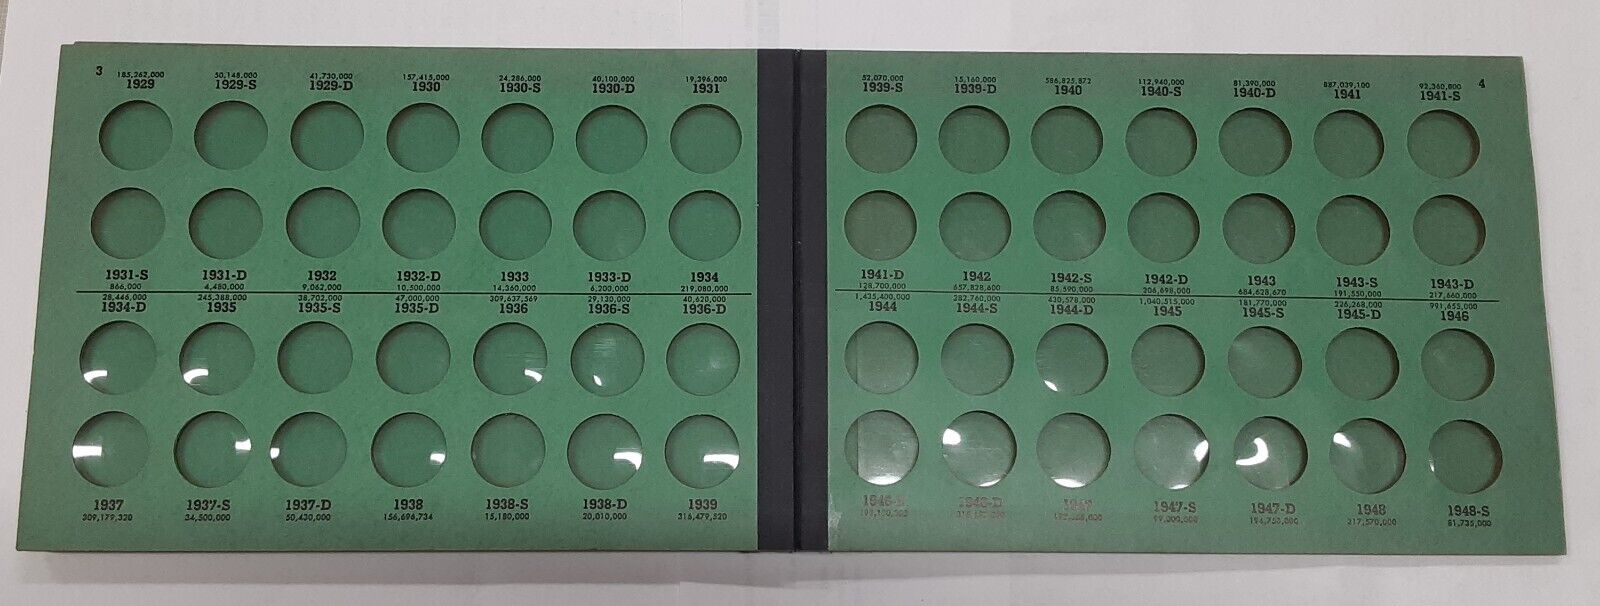 Meghrig Empty Album for Lincoln Cents 1909VDB-1948S Green Album G2 - Used